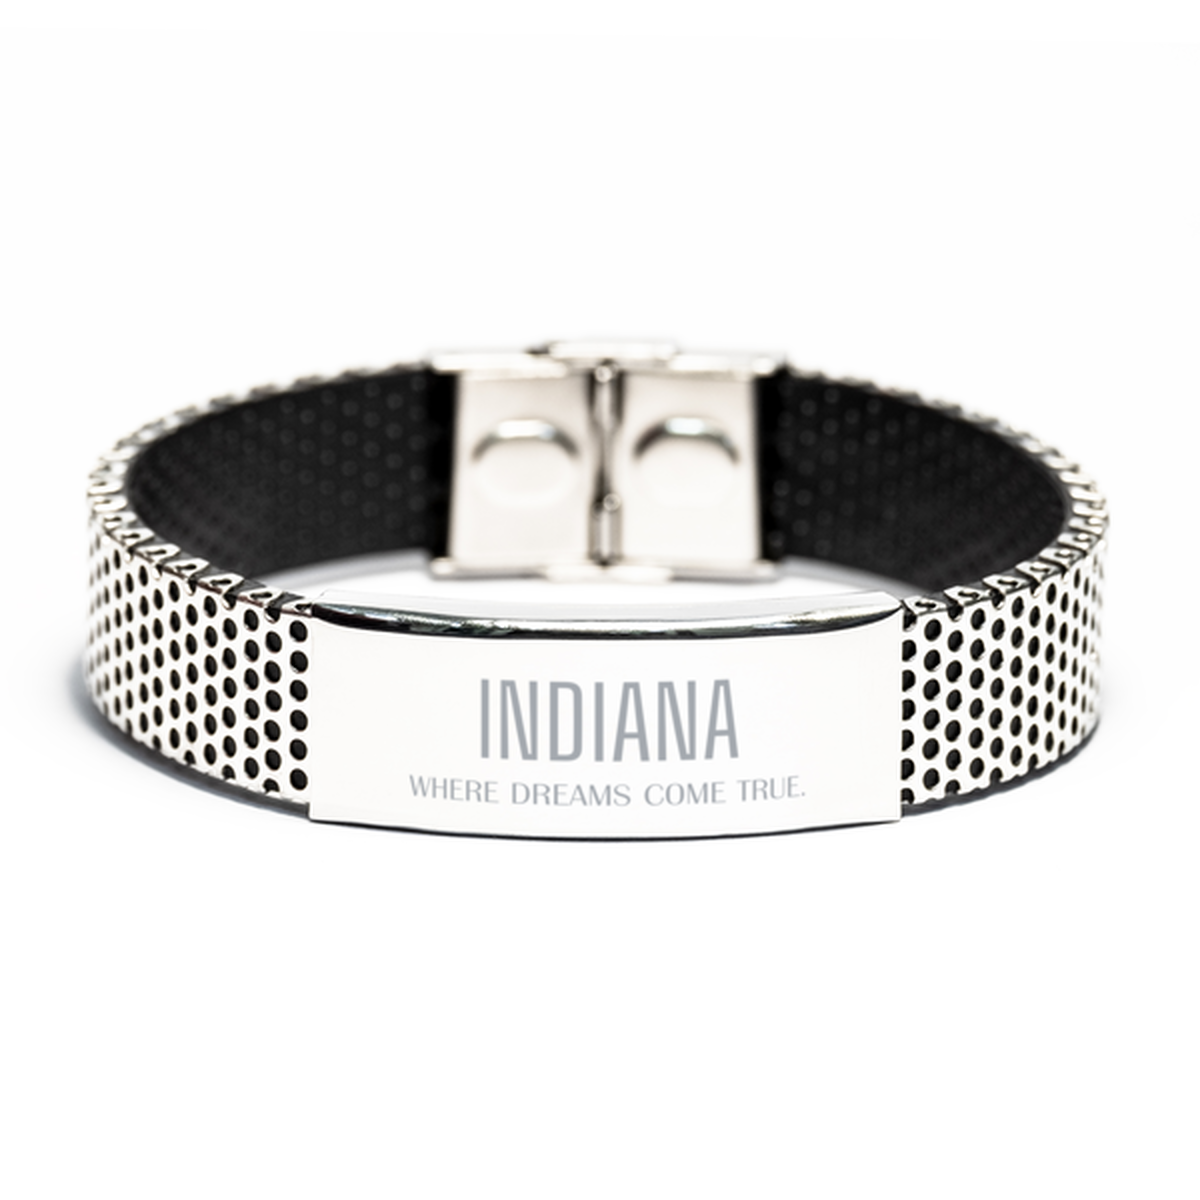 Love Indiana State Stainless Steel Bracelet, Indiana Where dreams come true, Birthday Inspirational Gifts For Indiana Men, Women, Friends